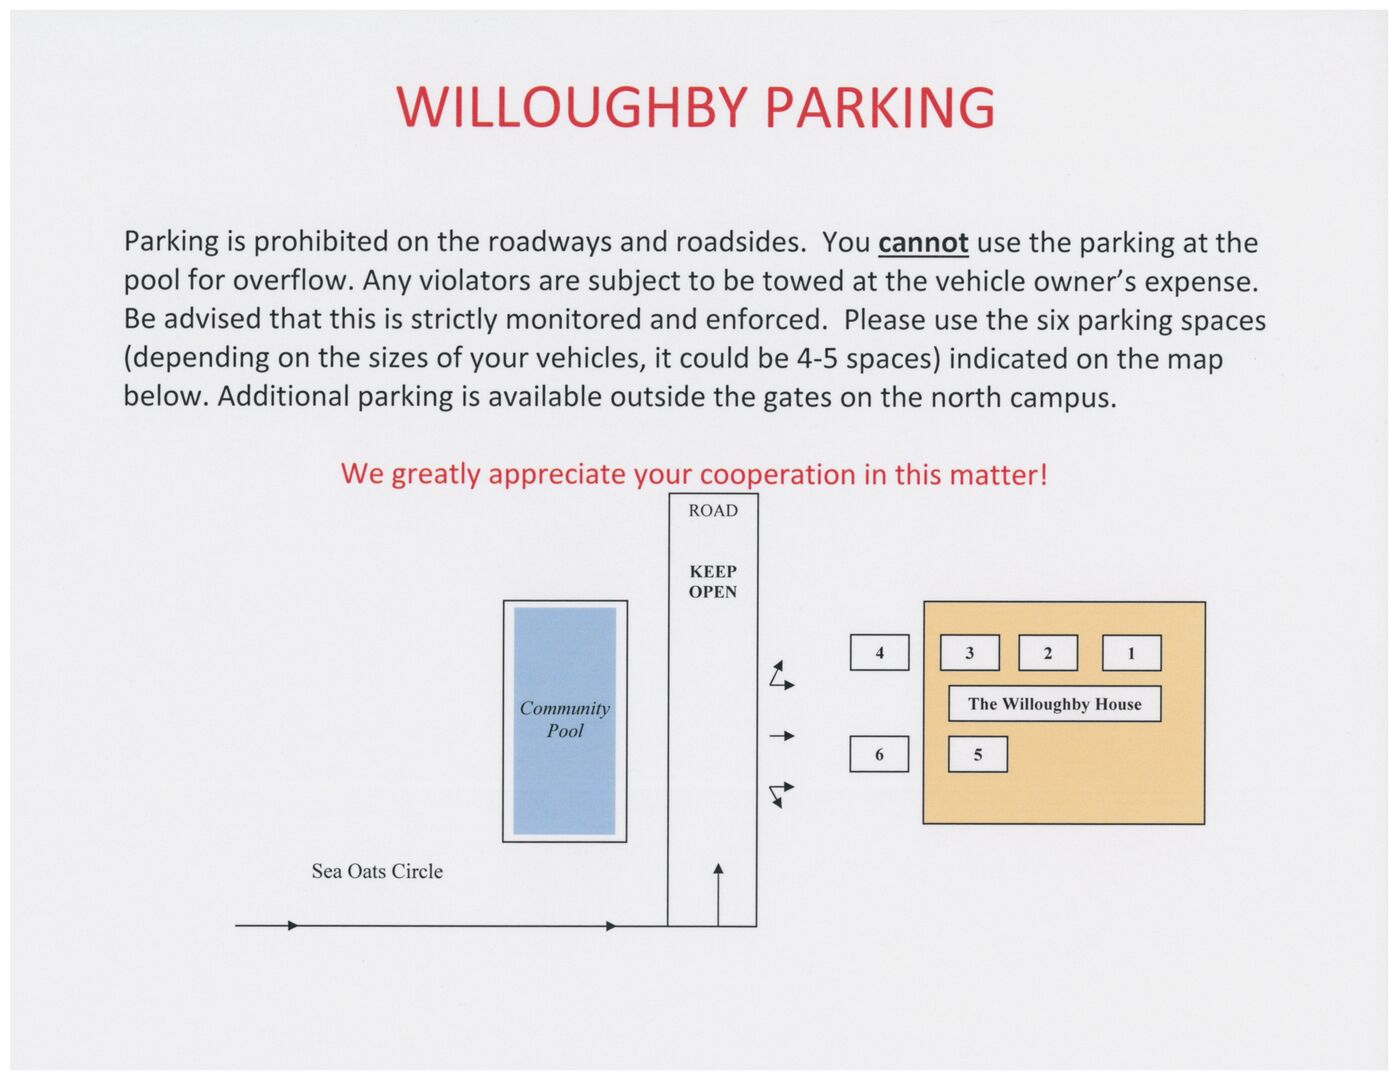 The Willoughby Parking